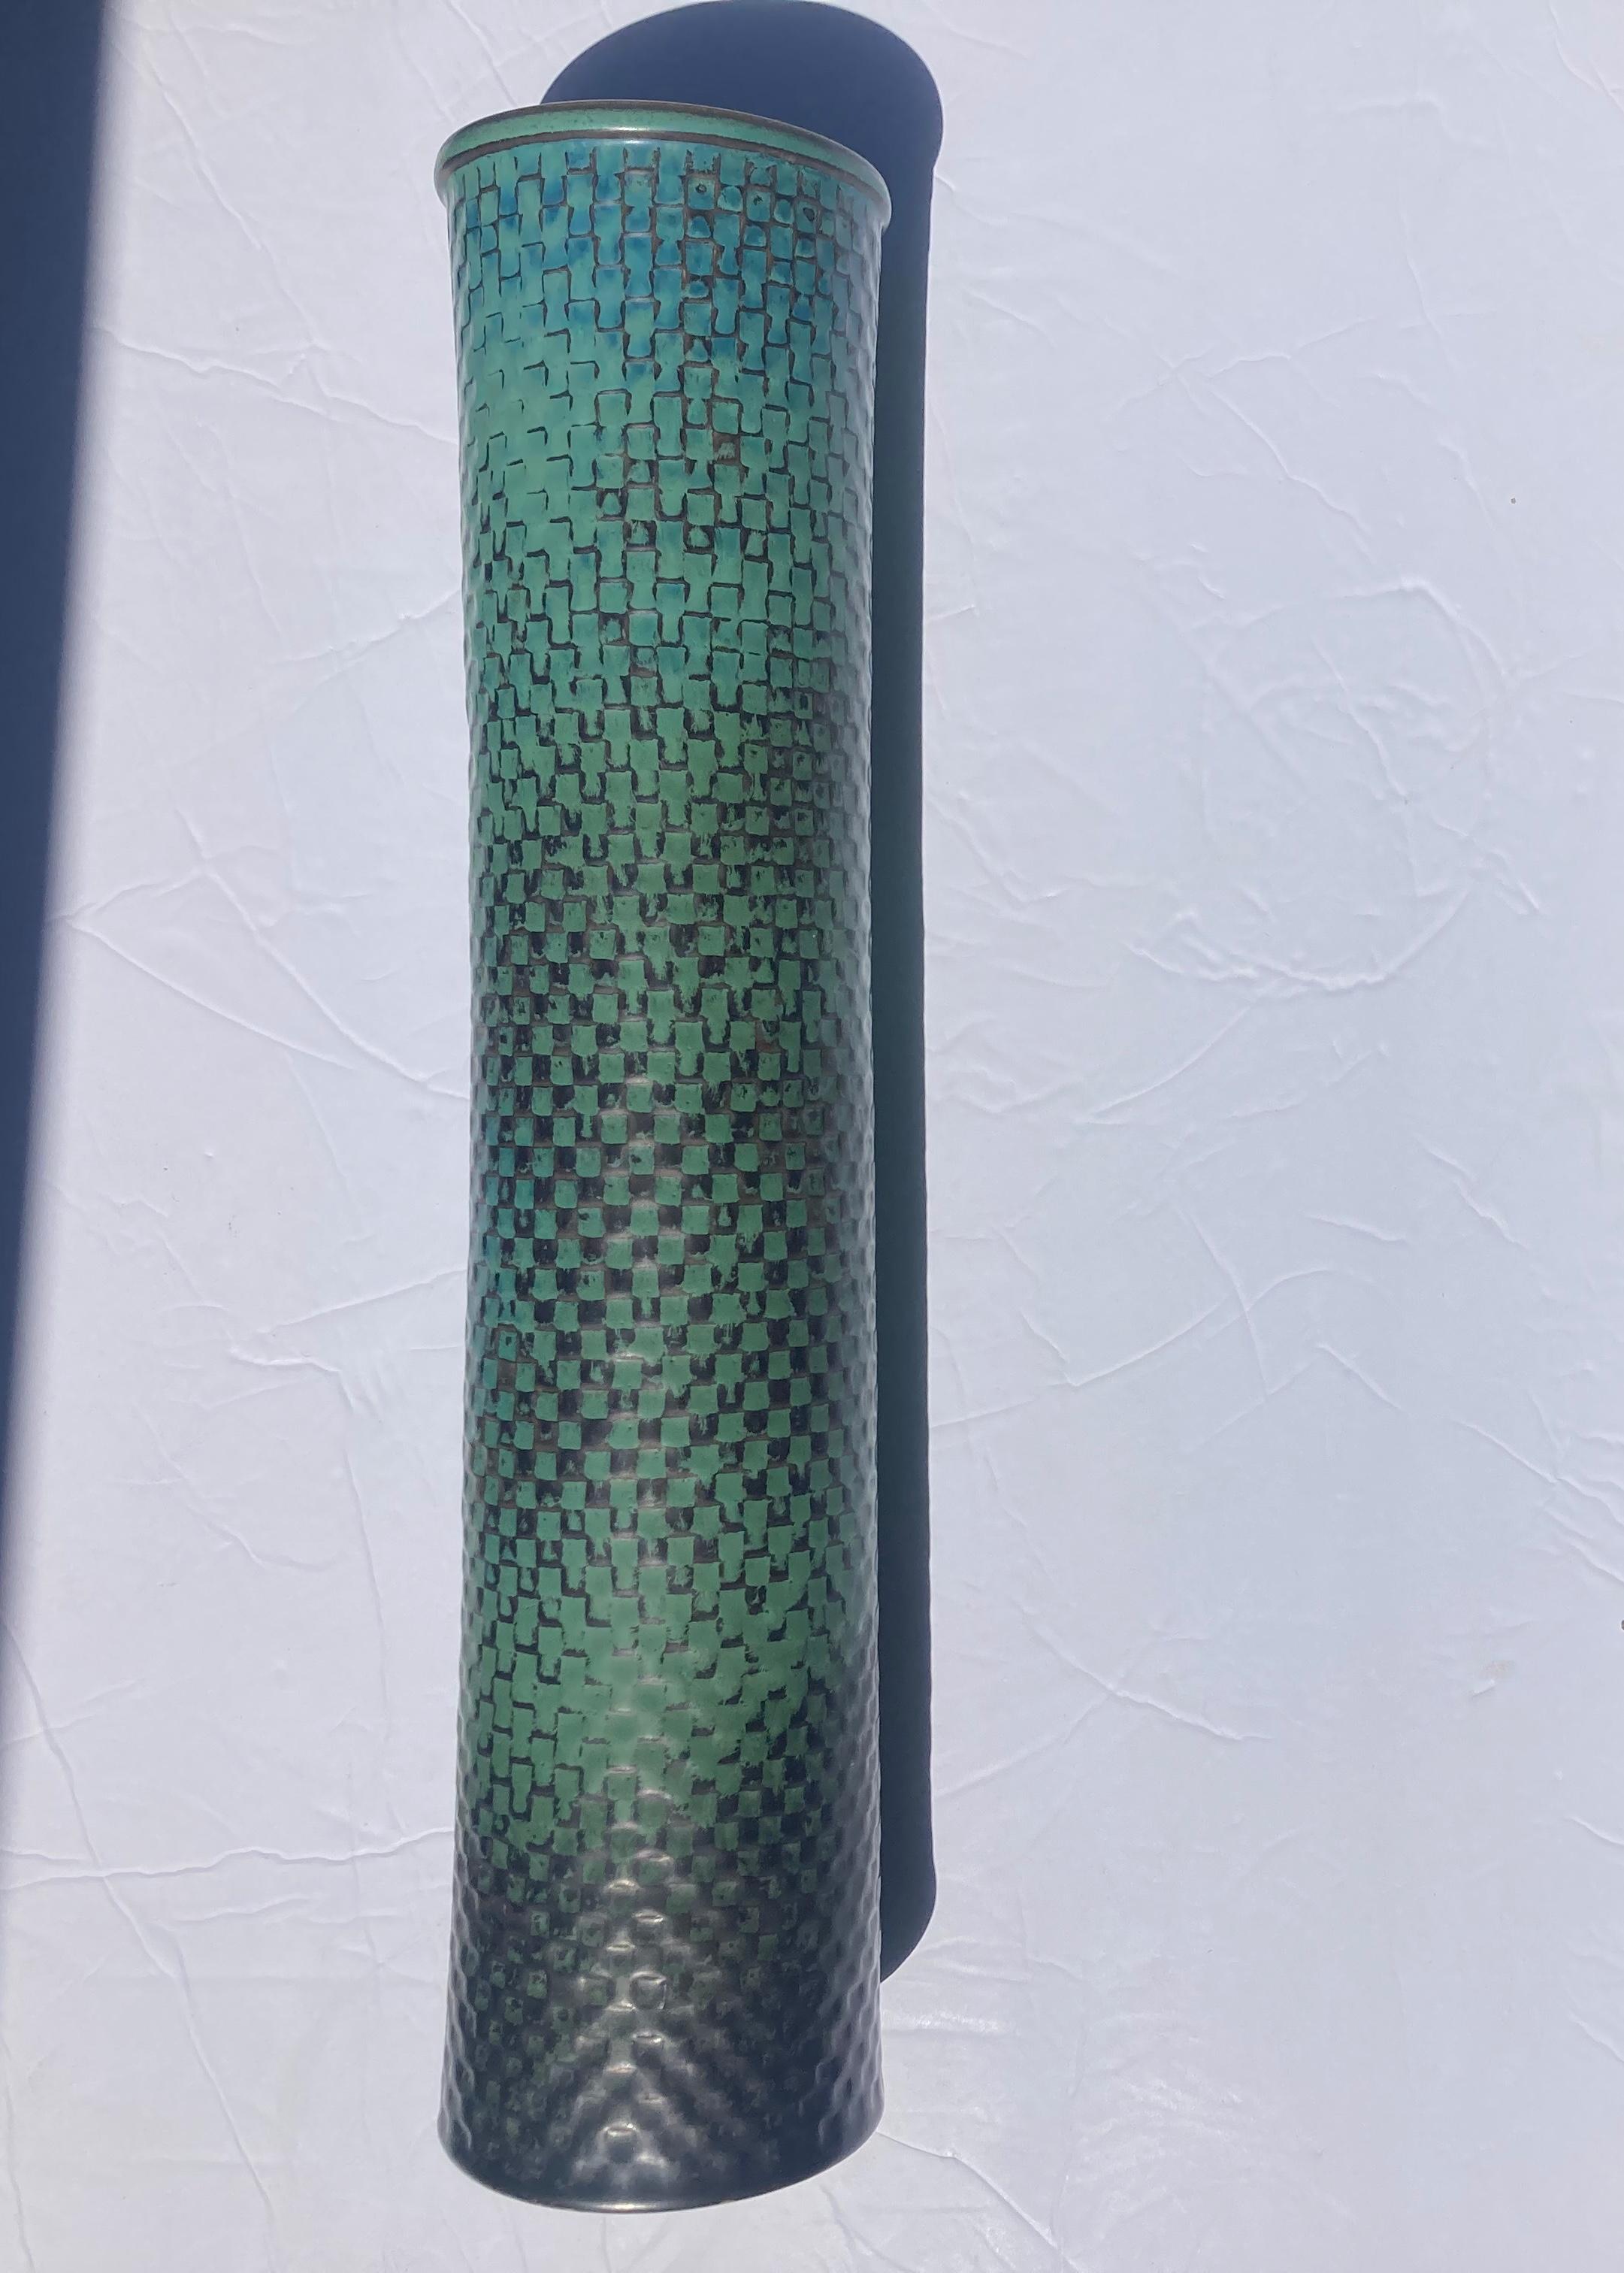 Stig Lindberg by Gustavsberg studio, Sweden, Unique stoneware with relief pattern in this monumental vase with matte green and charcoal grey glaze. Very rare vase. We list the piece in good/ great condition, but seems to be perfect. It was tested